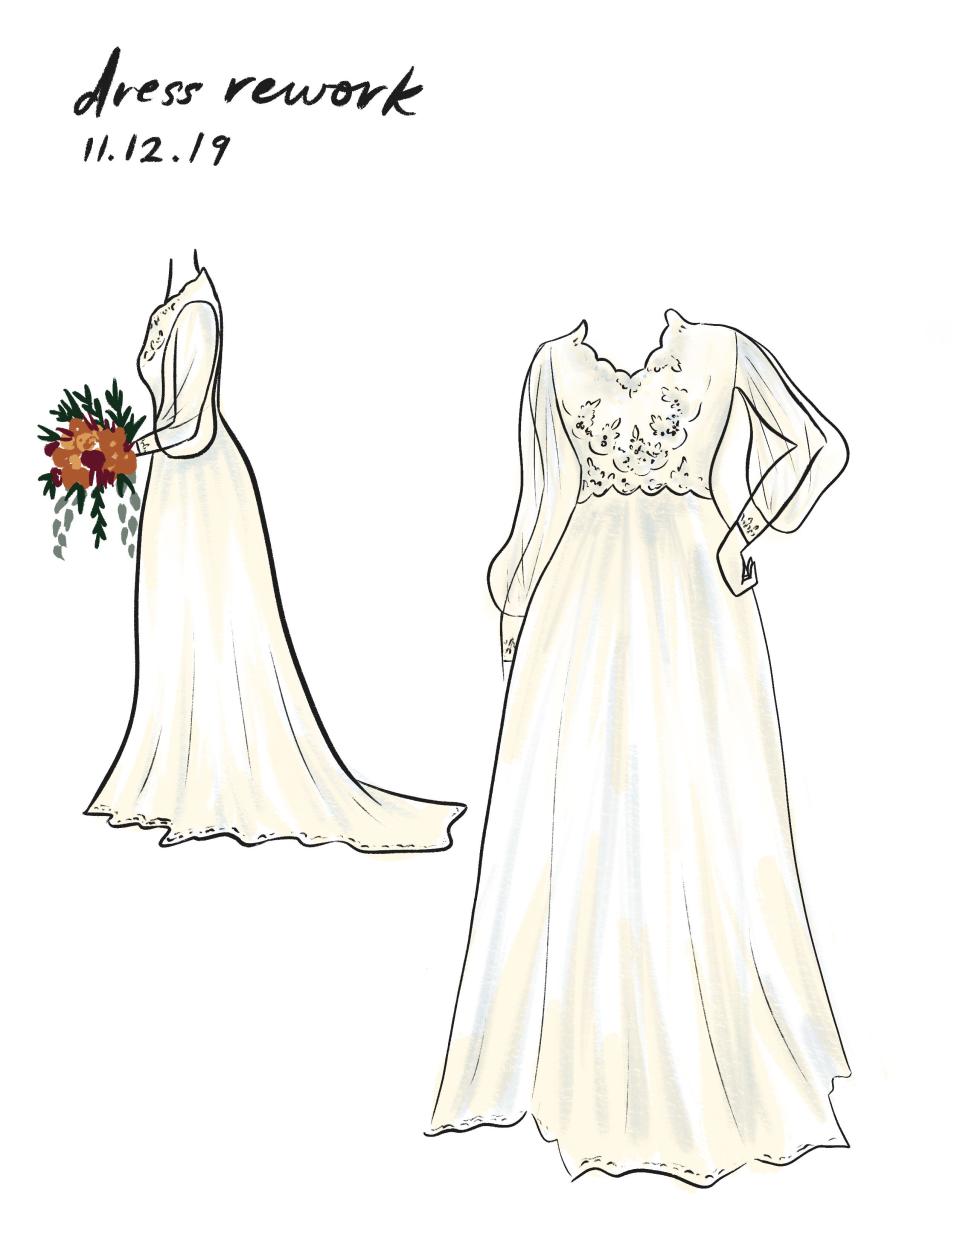 Vandergriff's wedding look ended up being an exact version of a sketch she did in 2019.